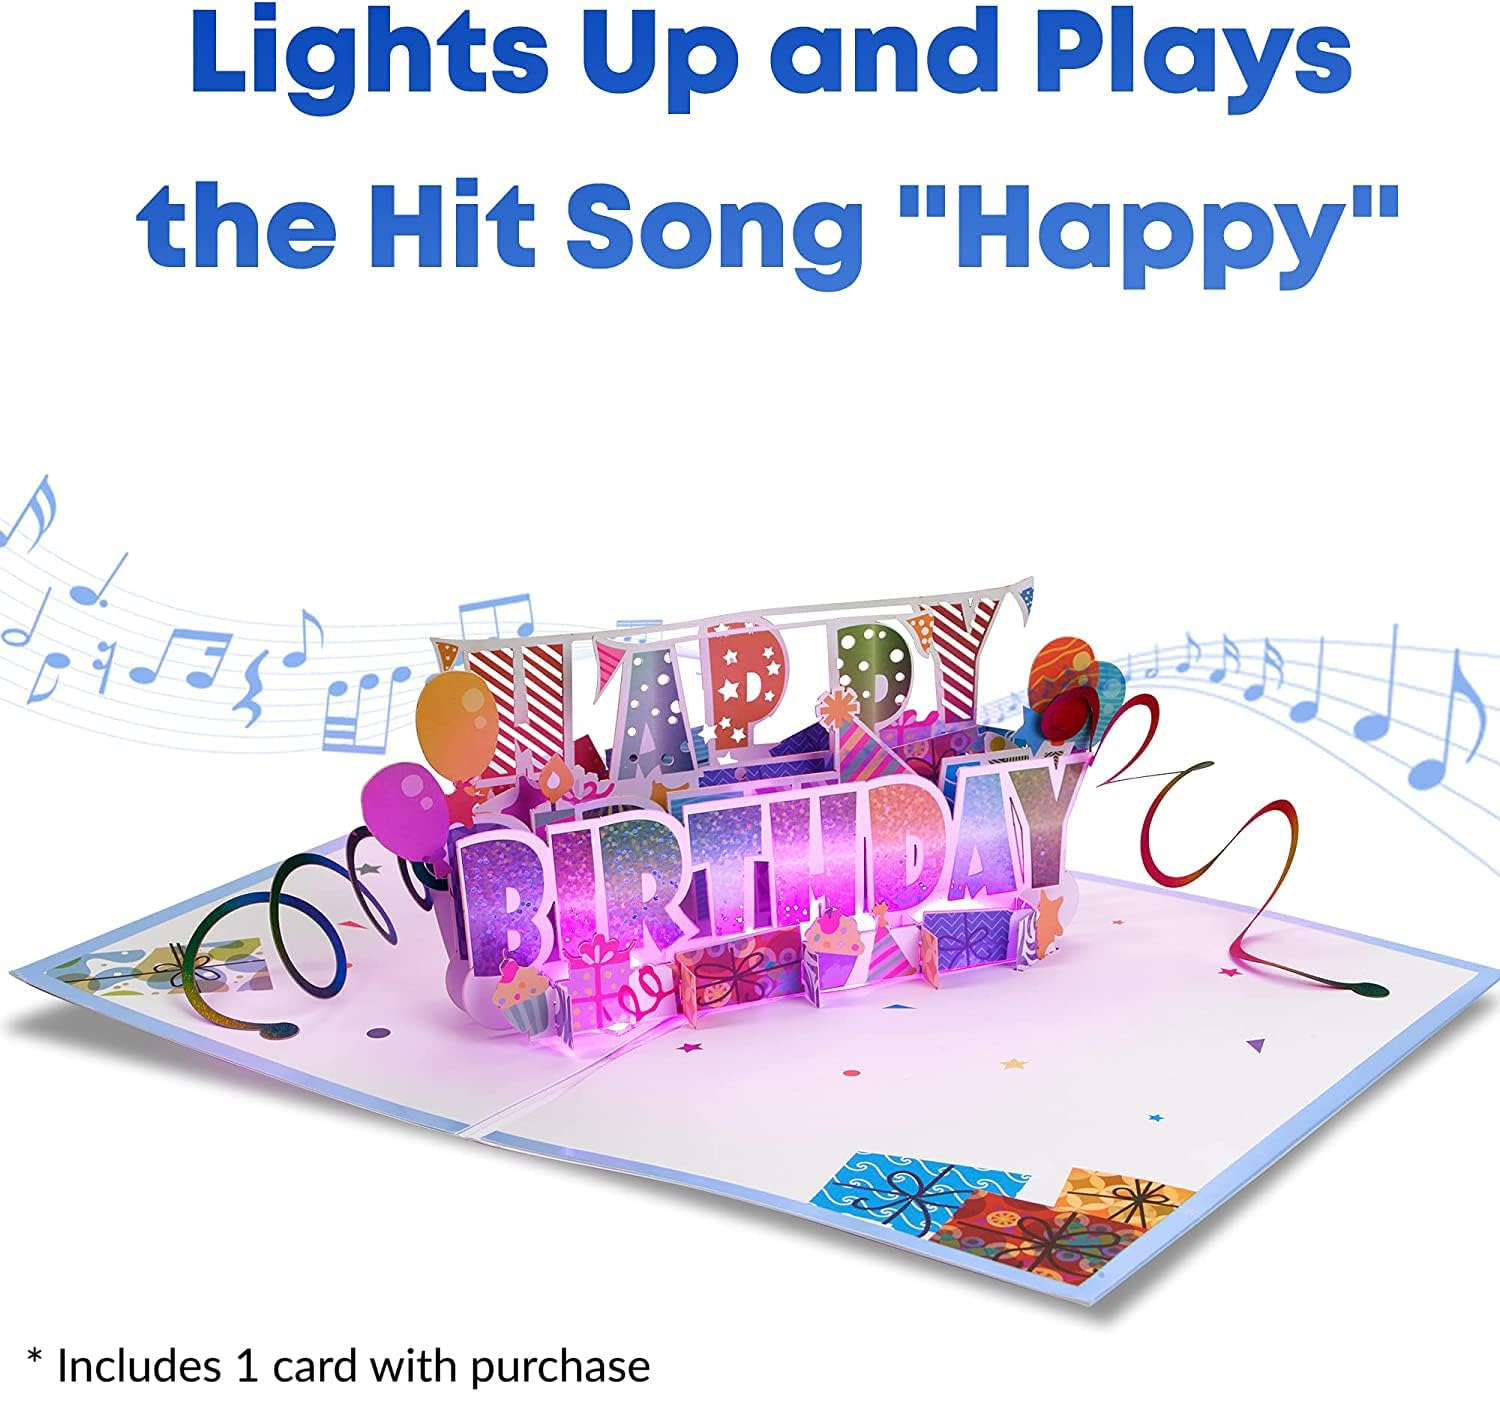 LIGHTS & MUSIC Happy Birthday Card - Plays Song 'HAPPY', 3D Musical Happy Birthday Card, Birthday Cards for Women, Birthday Cards for Men, Birthday Gift Cards, Greeting Cards, 1 Pop Up Birthday Card